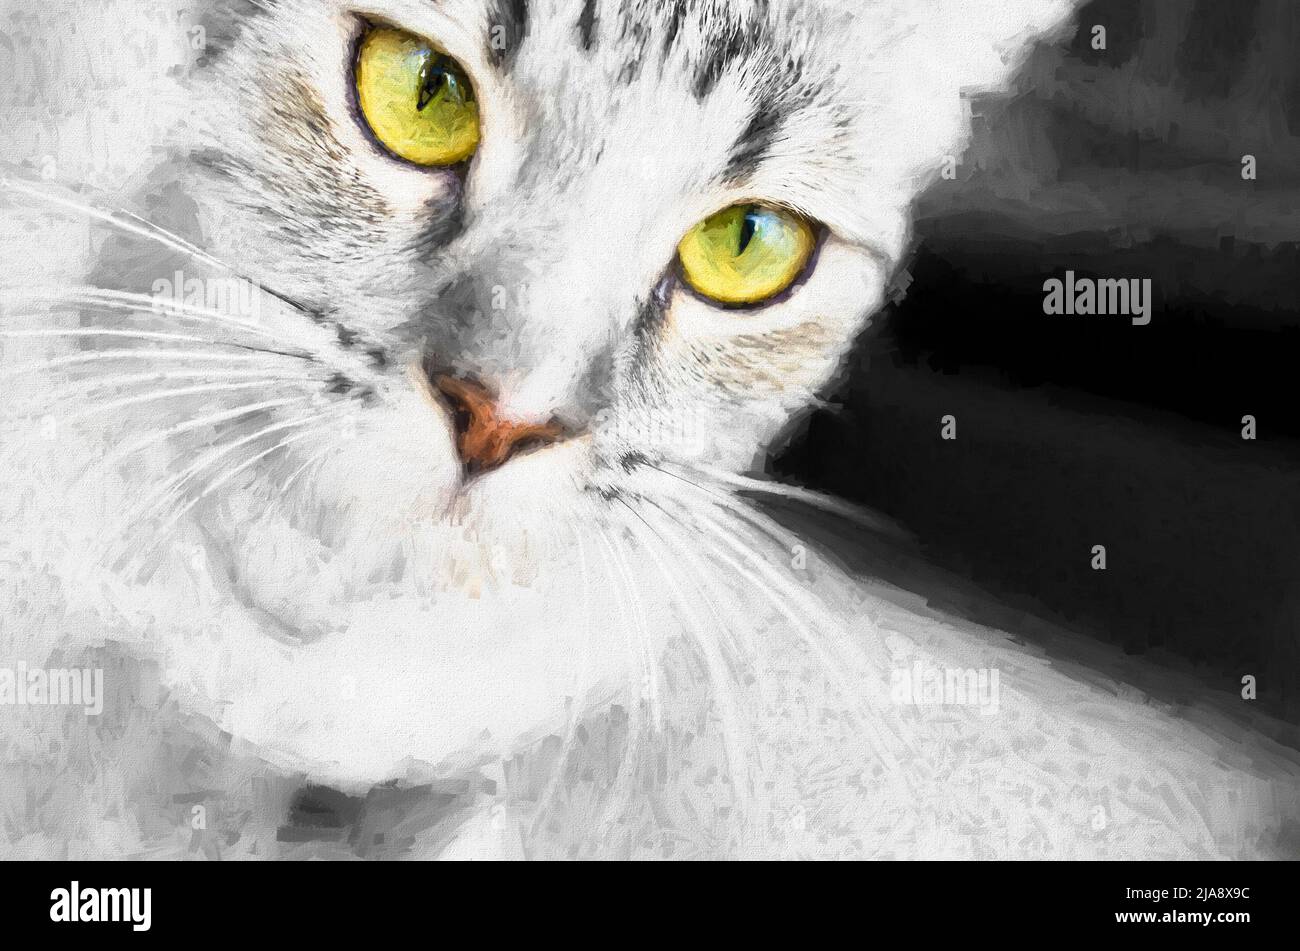 A Close Up Of A Tabby Cat In Graphic Illustration Format Stock Photo